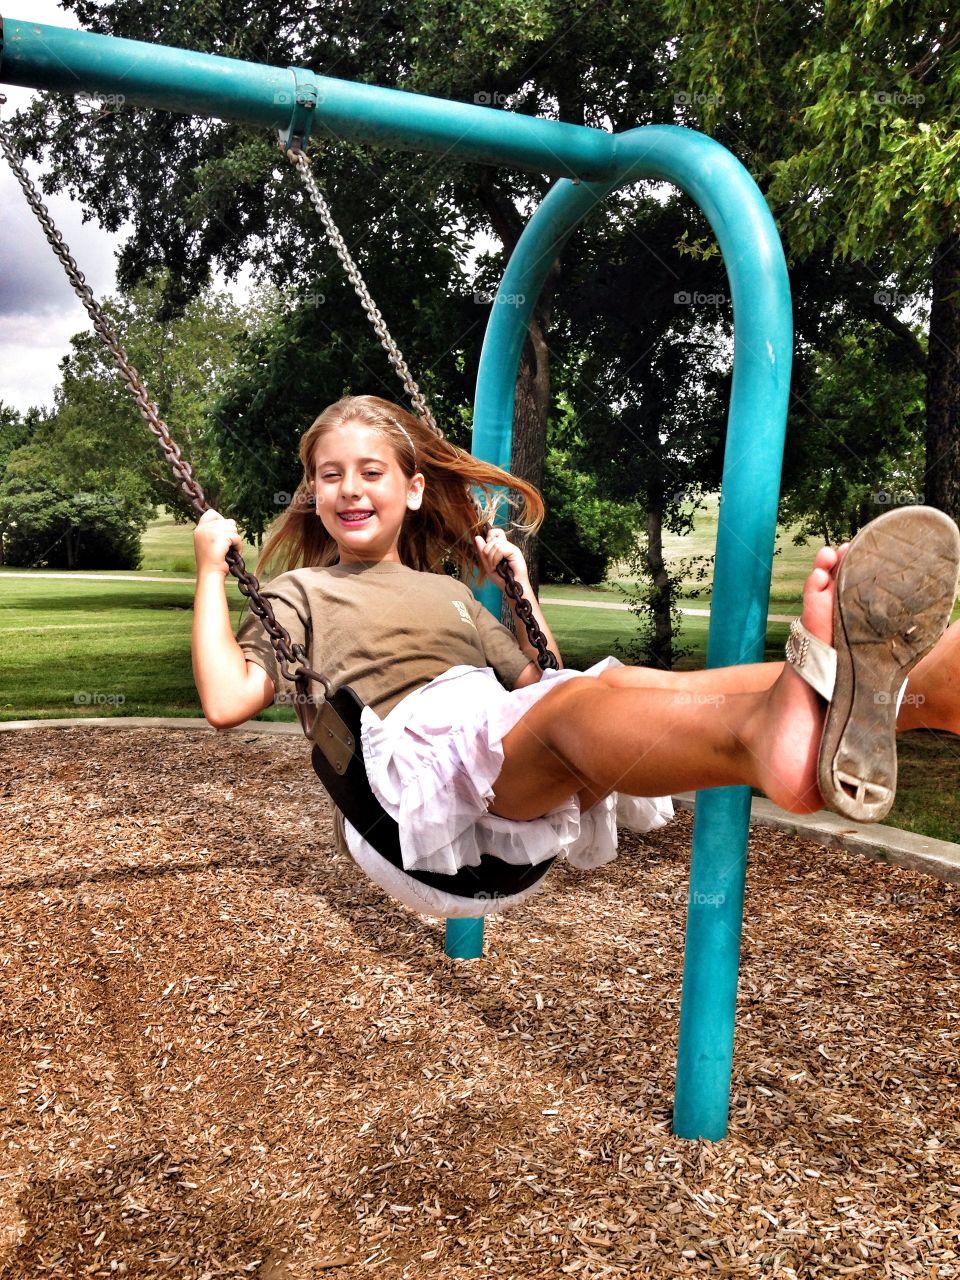 Smile and swing. Girl smiling on a swing at the park